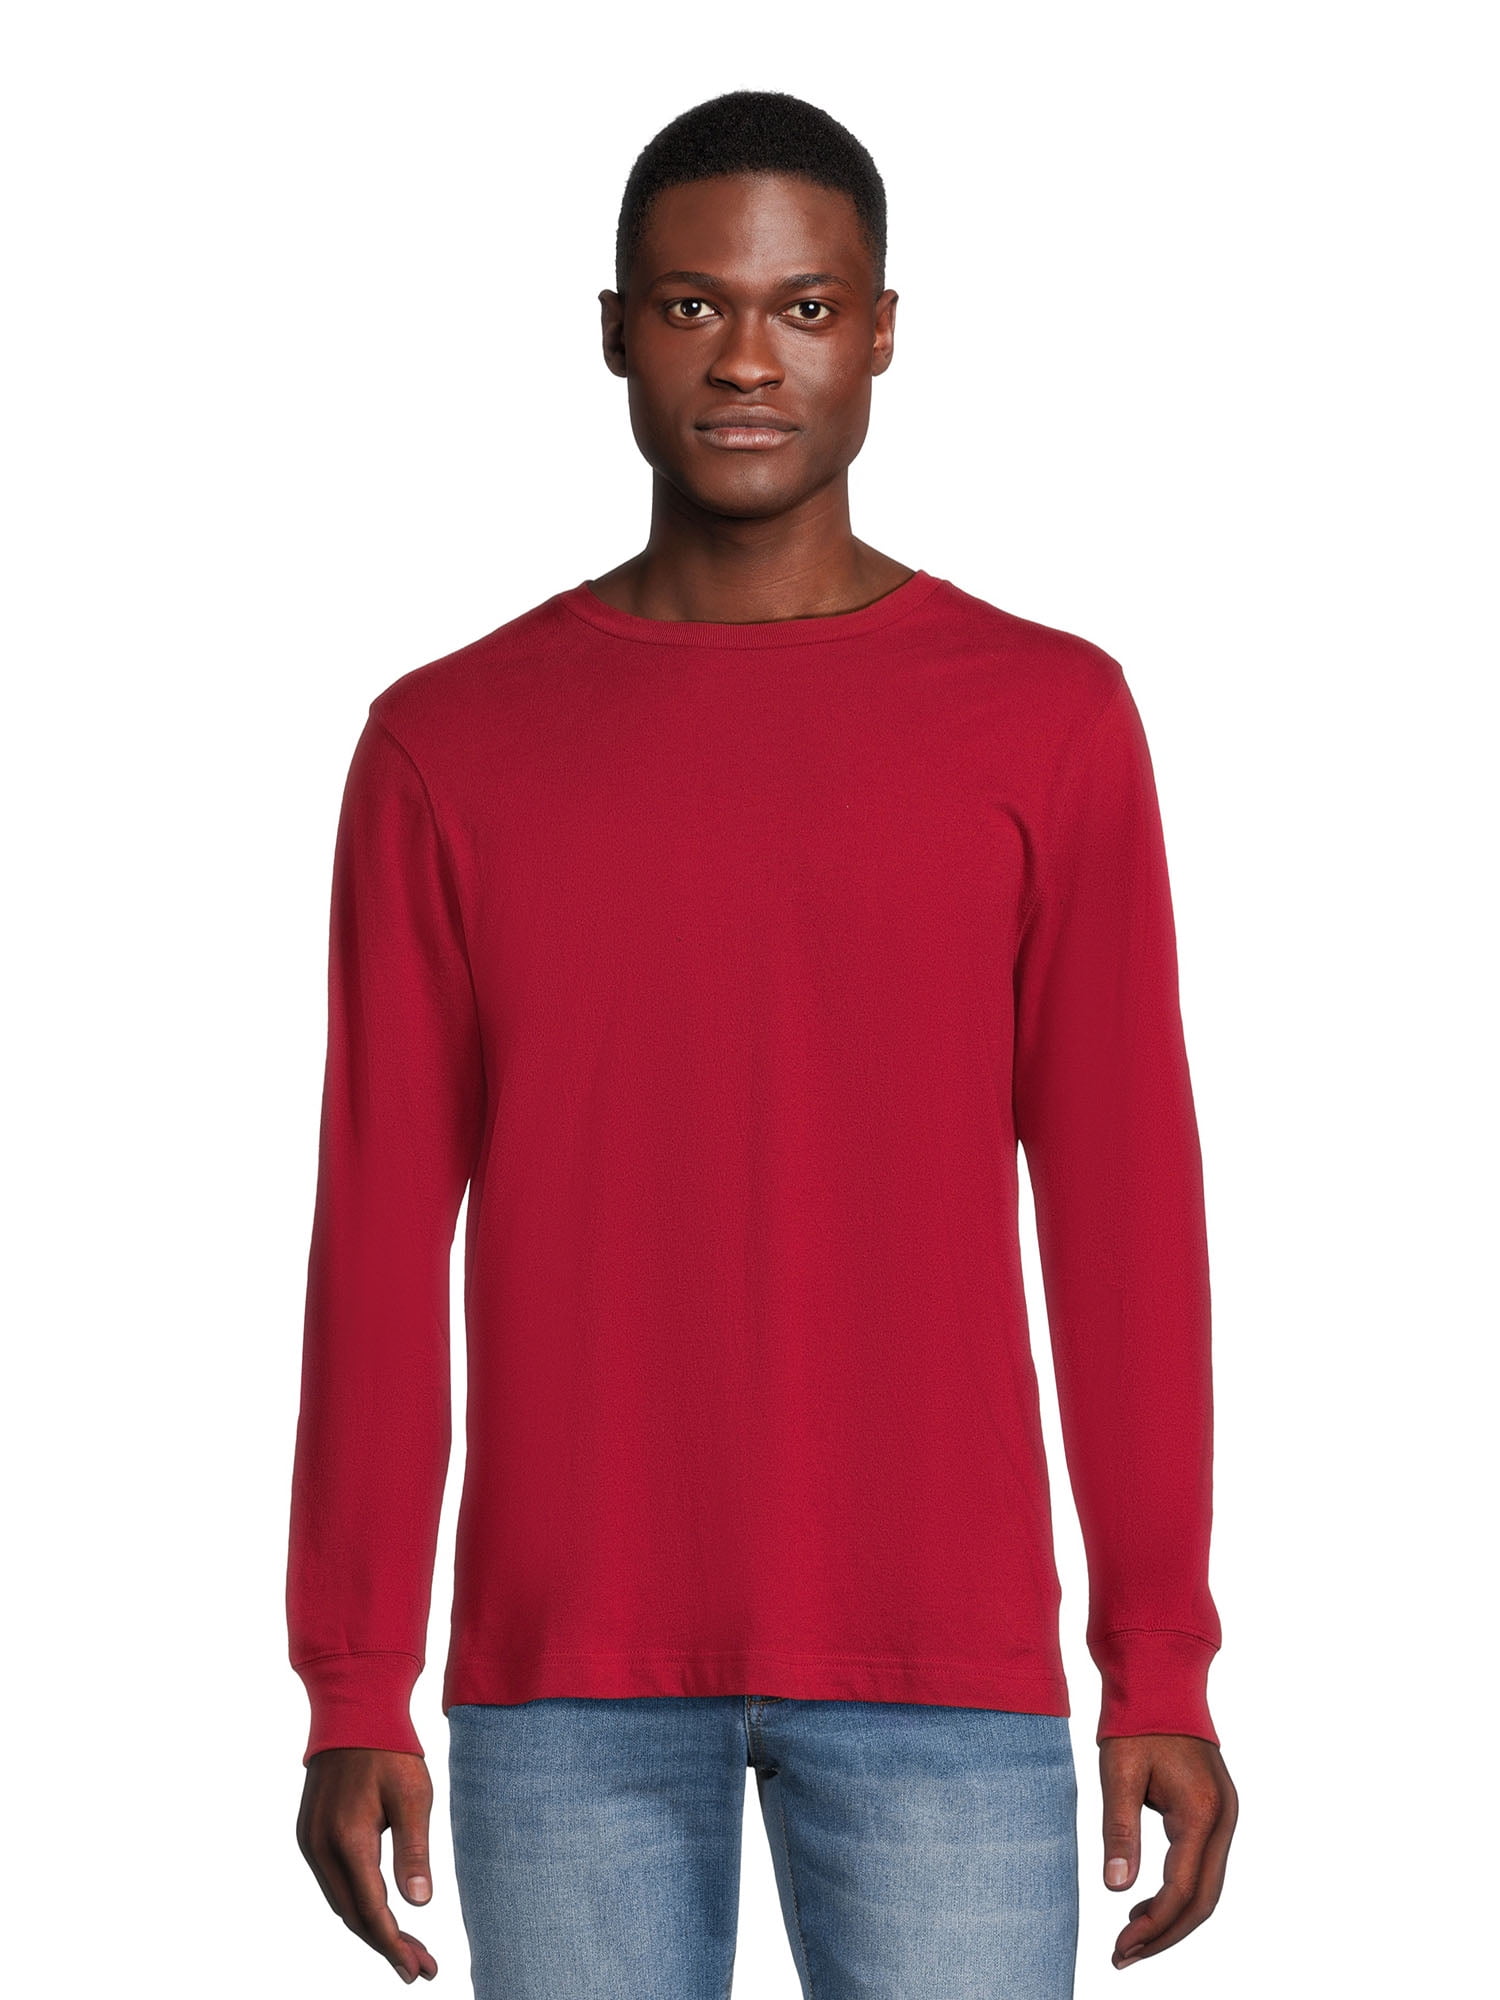 George Men's Crewneck Tee with Long Sleeves, Sizes XS-3XLT